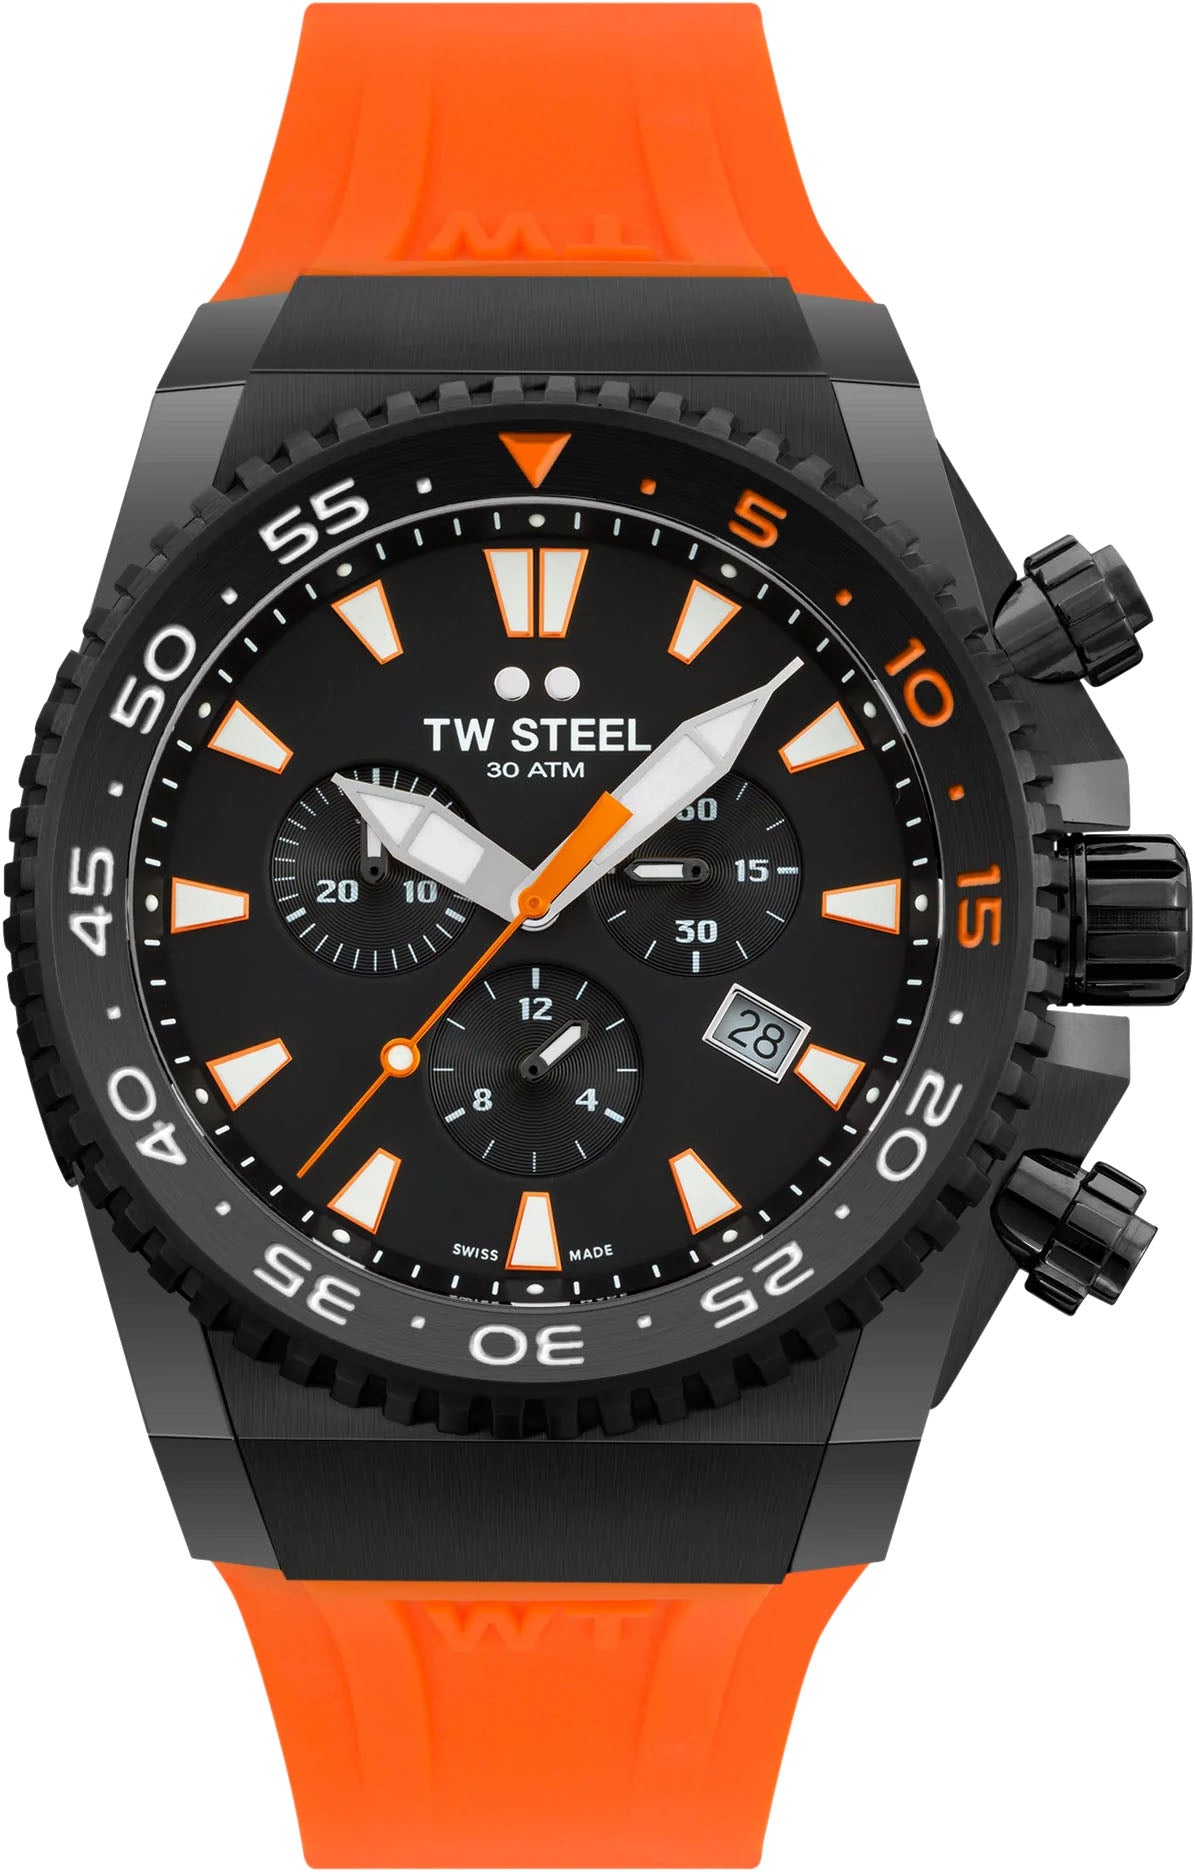 Photos - Wrist Watch TW Steel Watch ACE Diver Limited Edition TW-661 